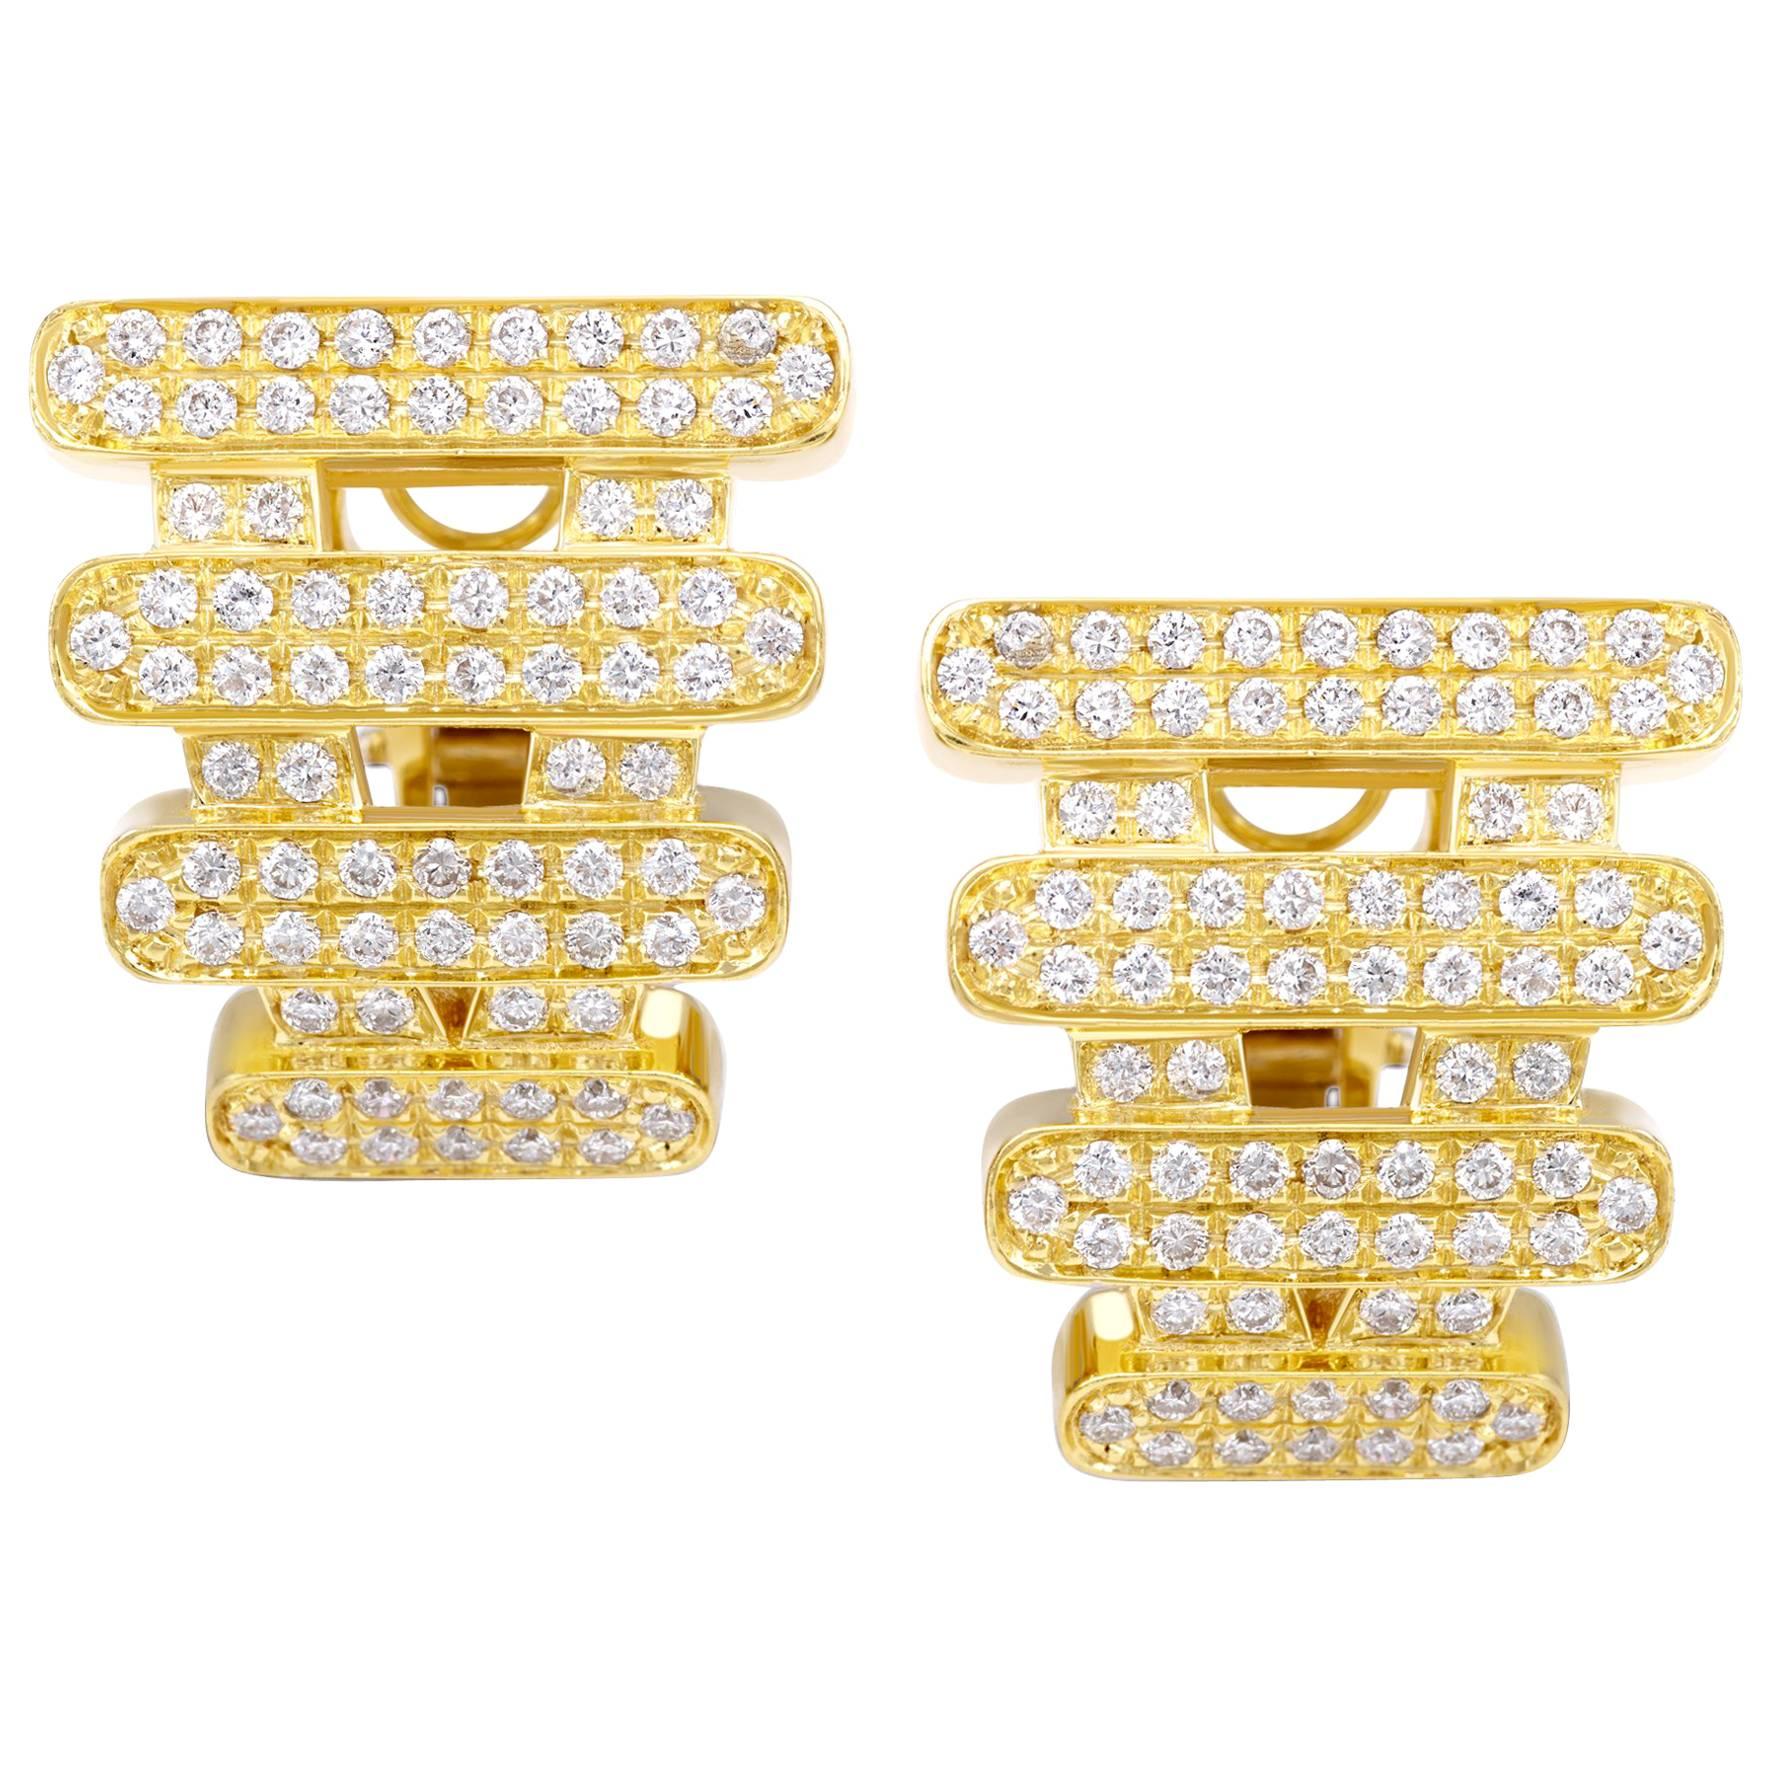 Earrings Collection "Moonlight" 18 Karat Yellow Gold and Diamonds For Sale